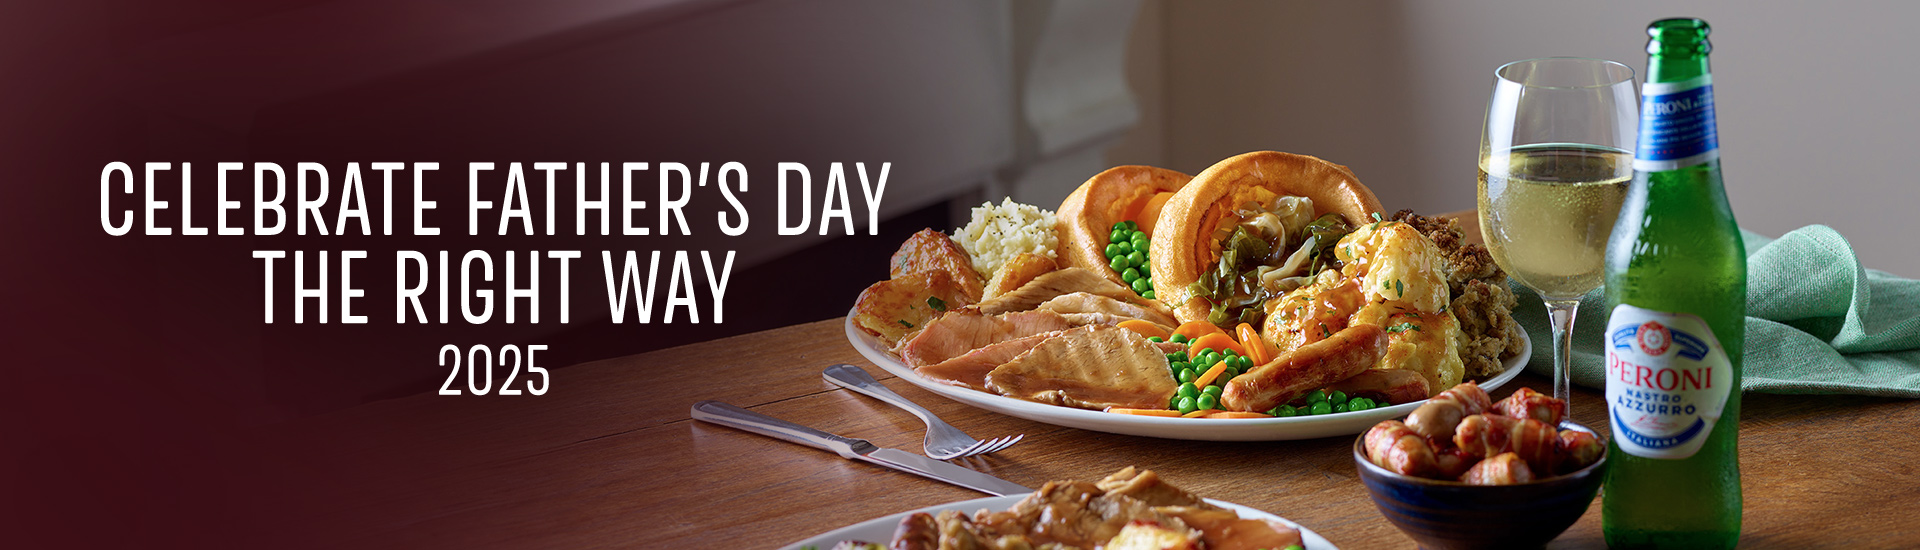 Father’s day carvery in Billingham